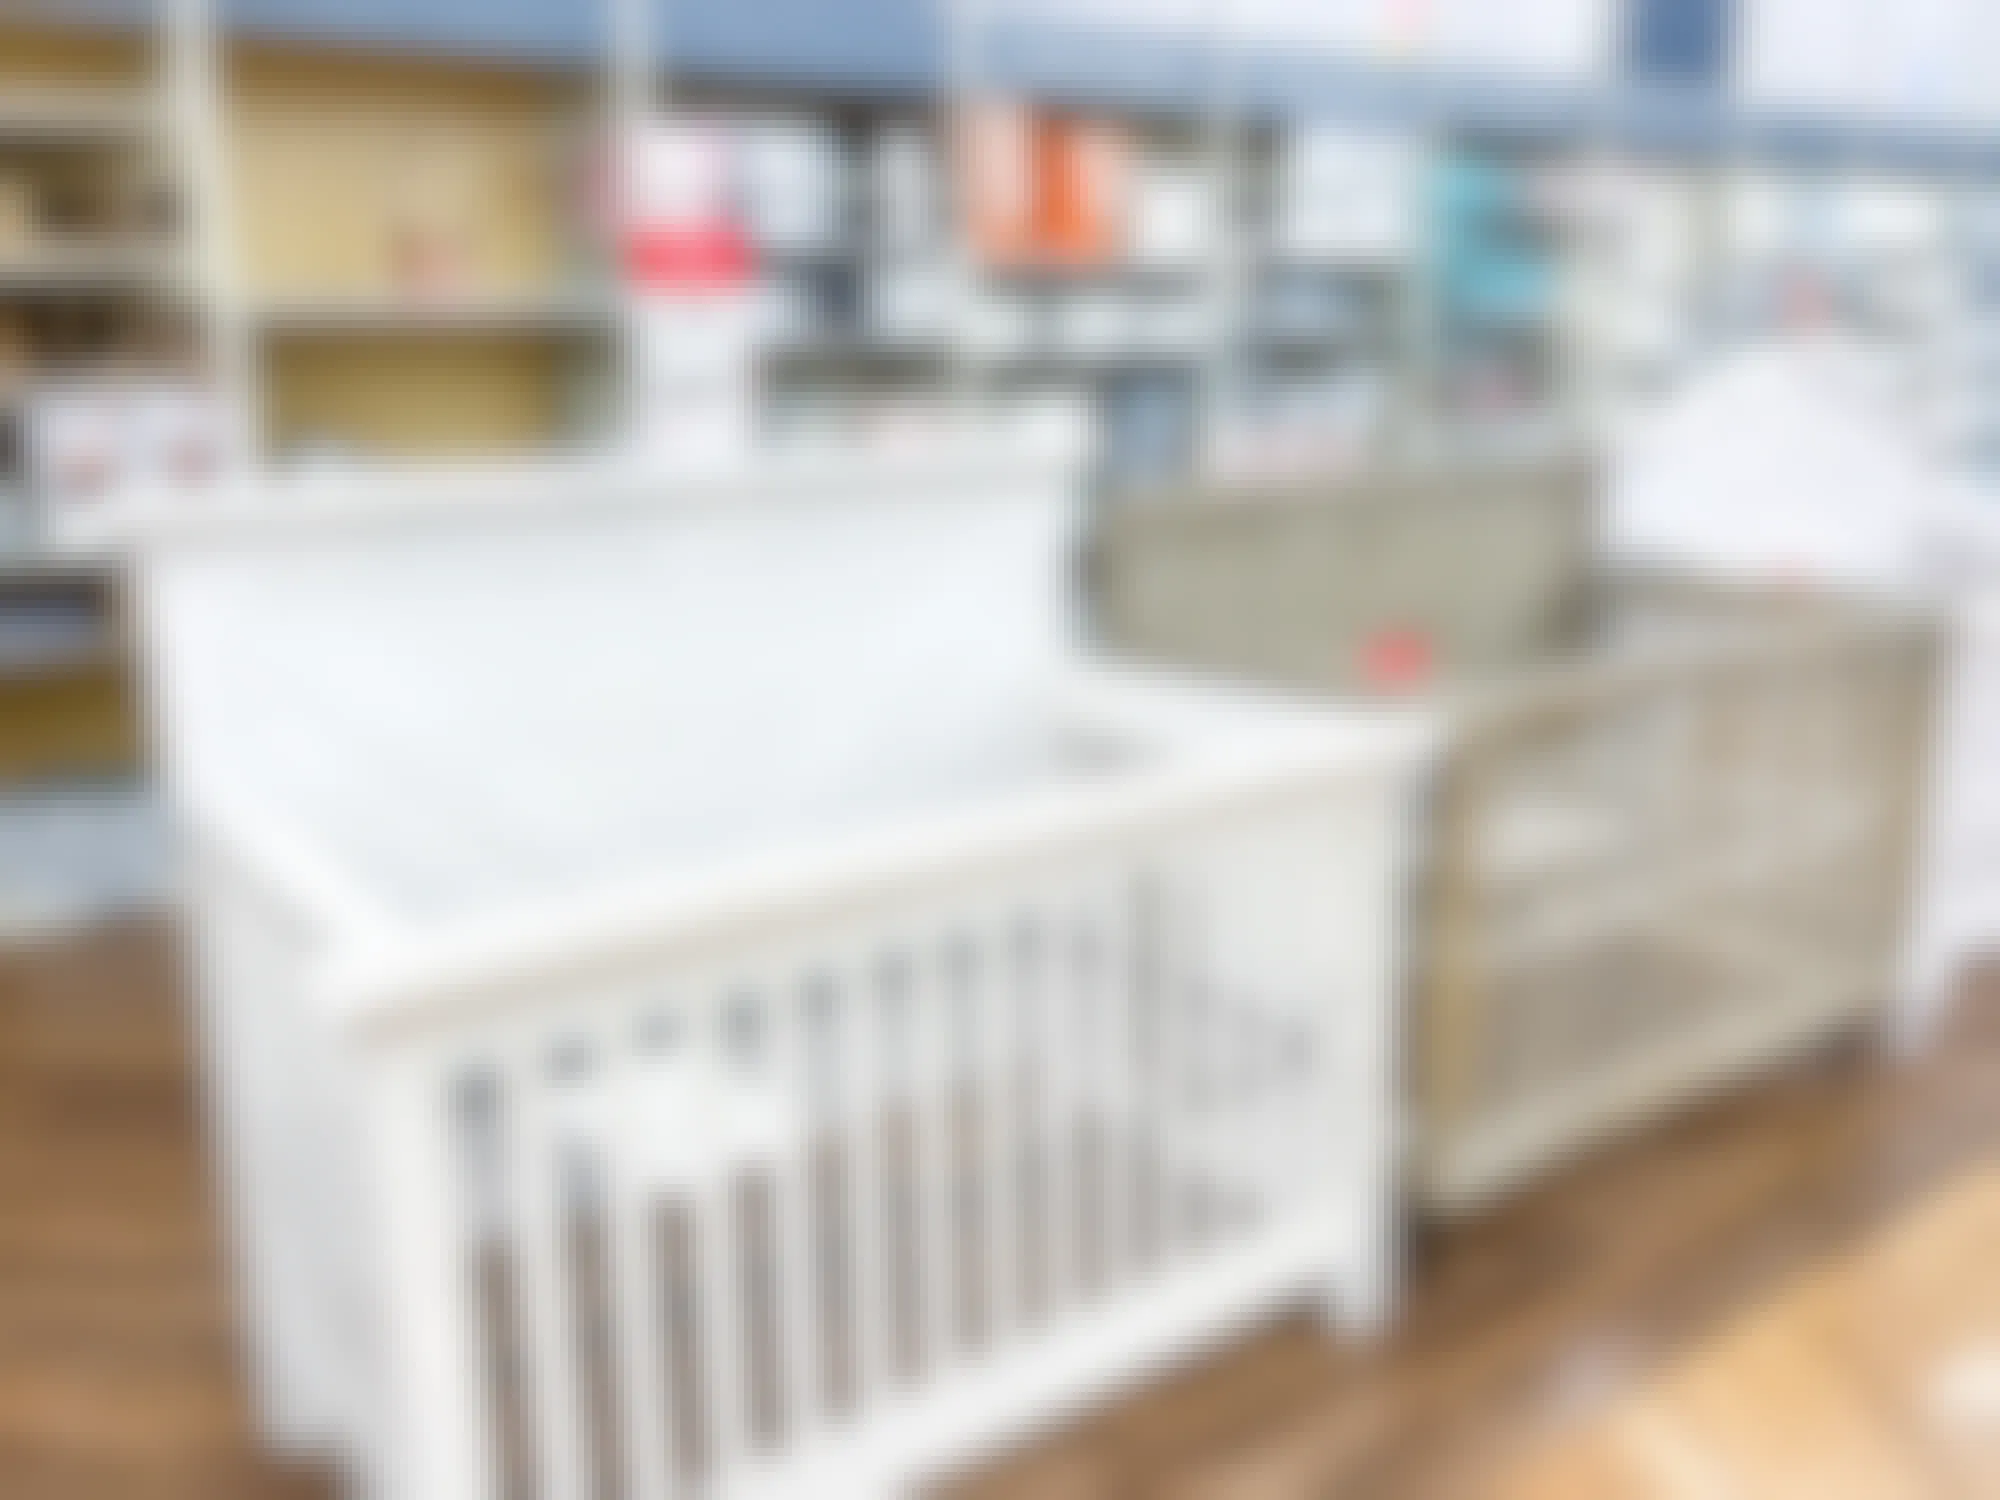 several baby cribs on display at a buybuy baby store